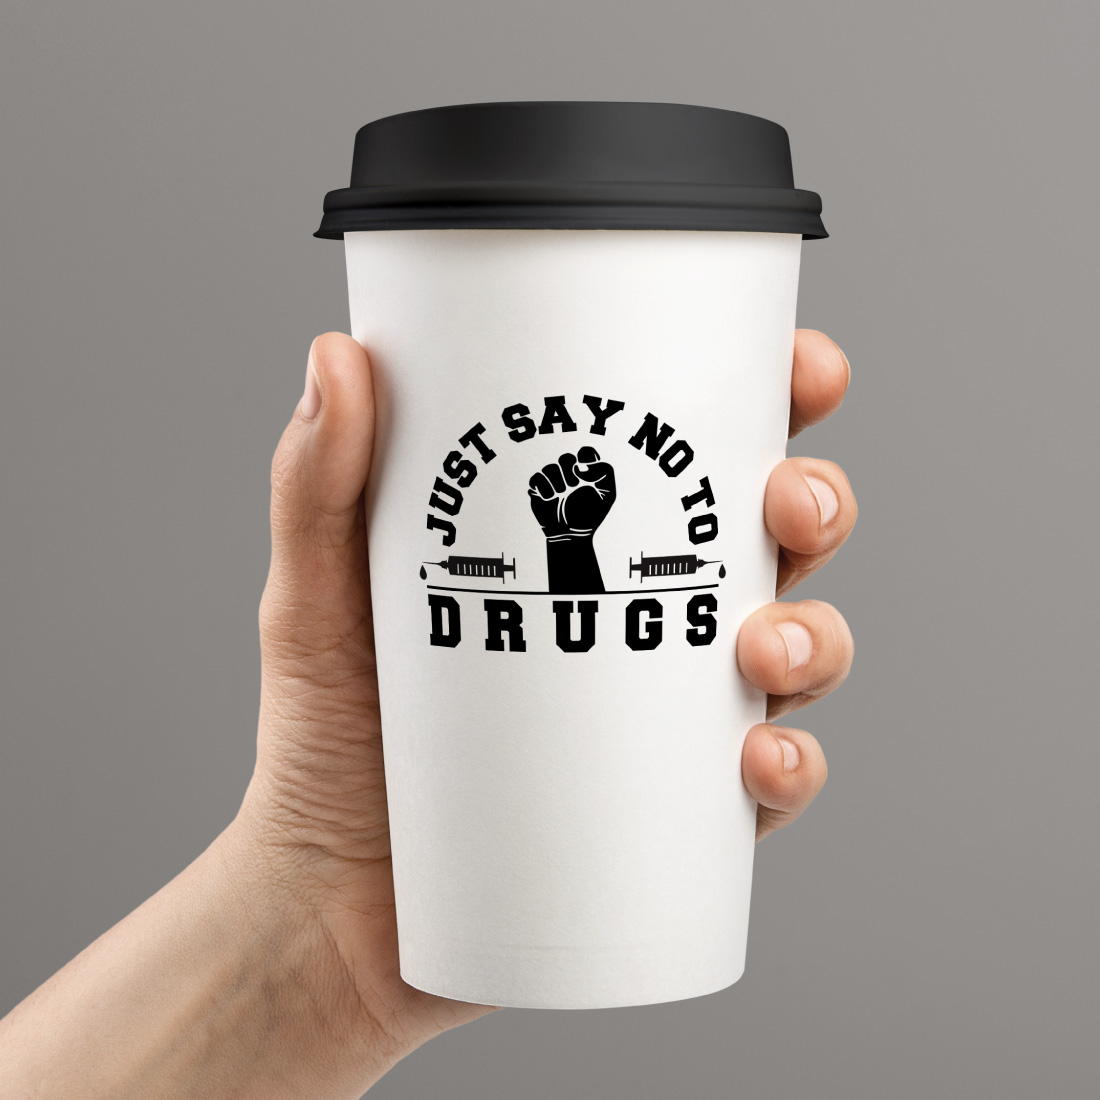 just say no to drugs cup design 752